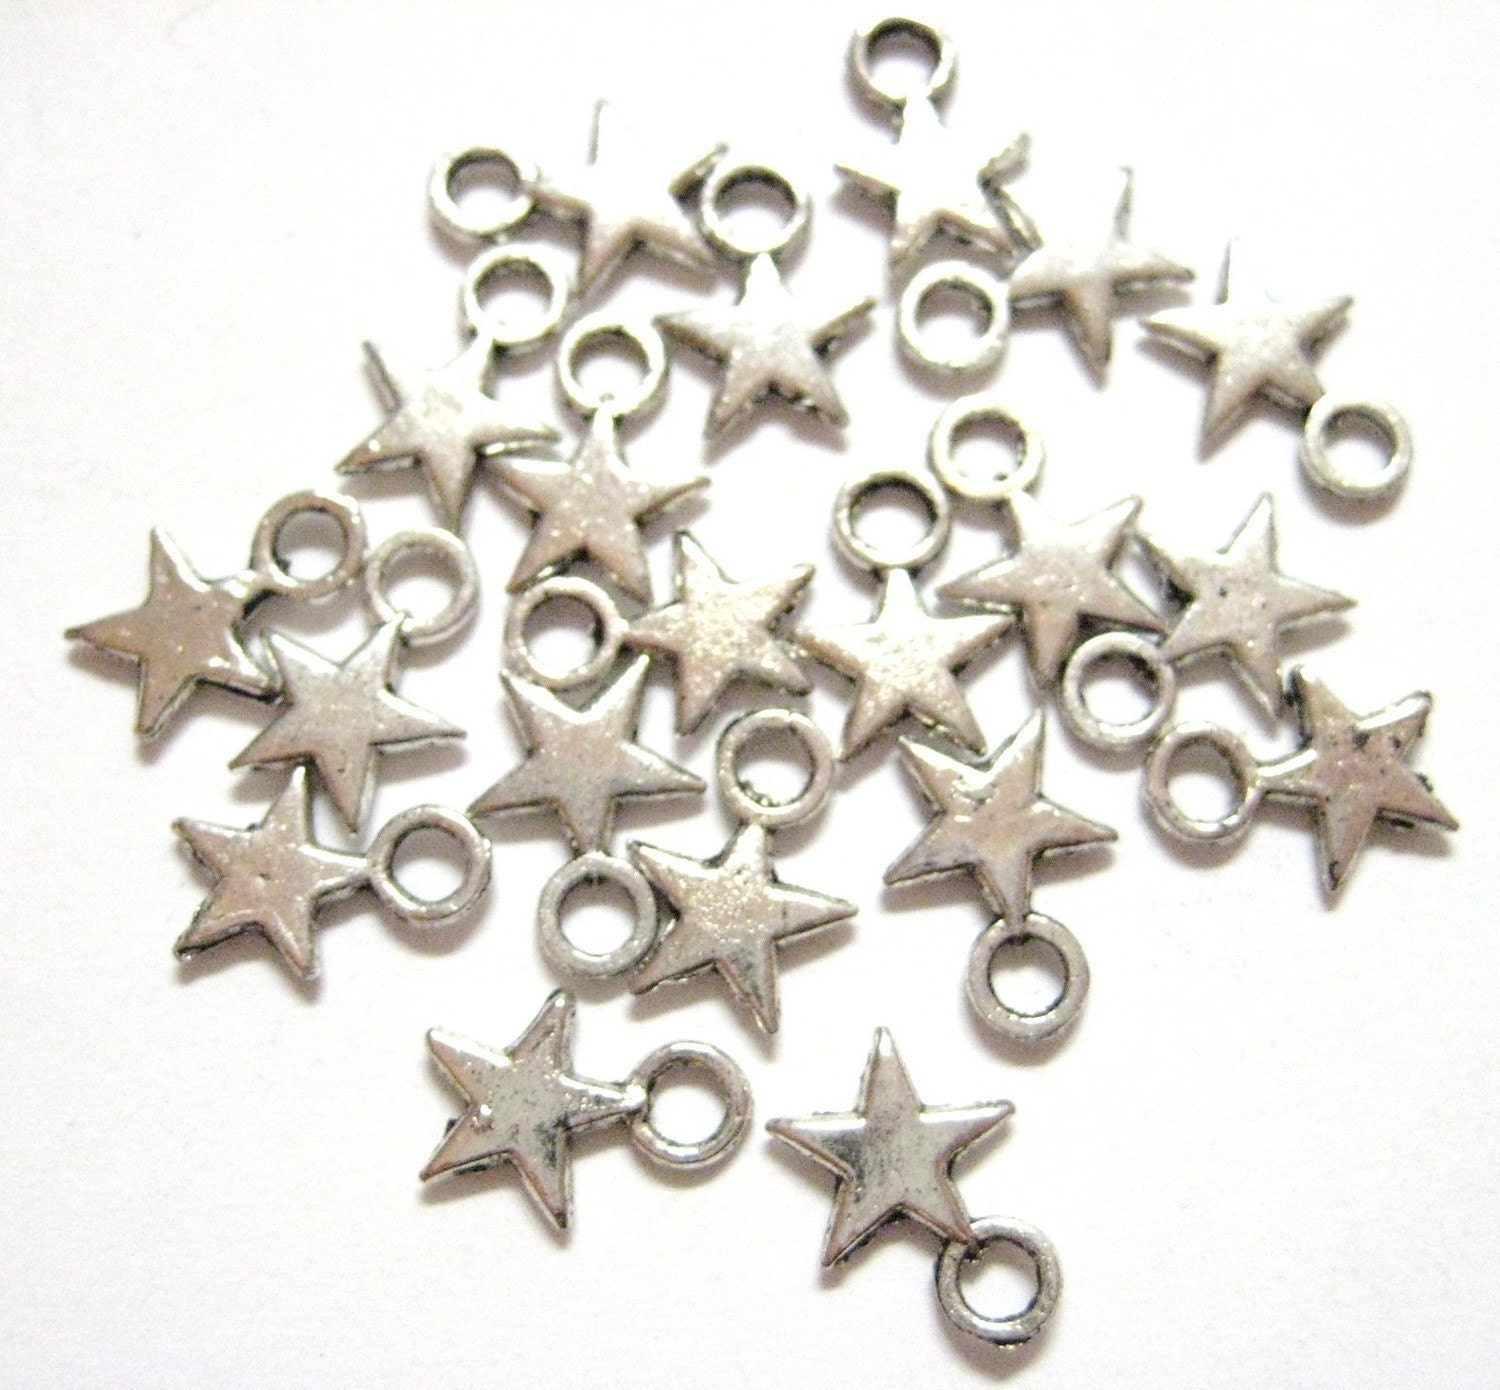 10PCs Stainless Steel Silver Colorful Star-Shaped Charms Jewelry Findings 9*7mm